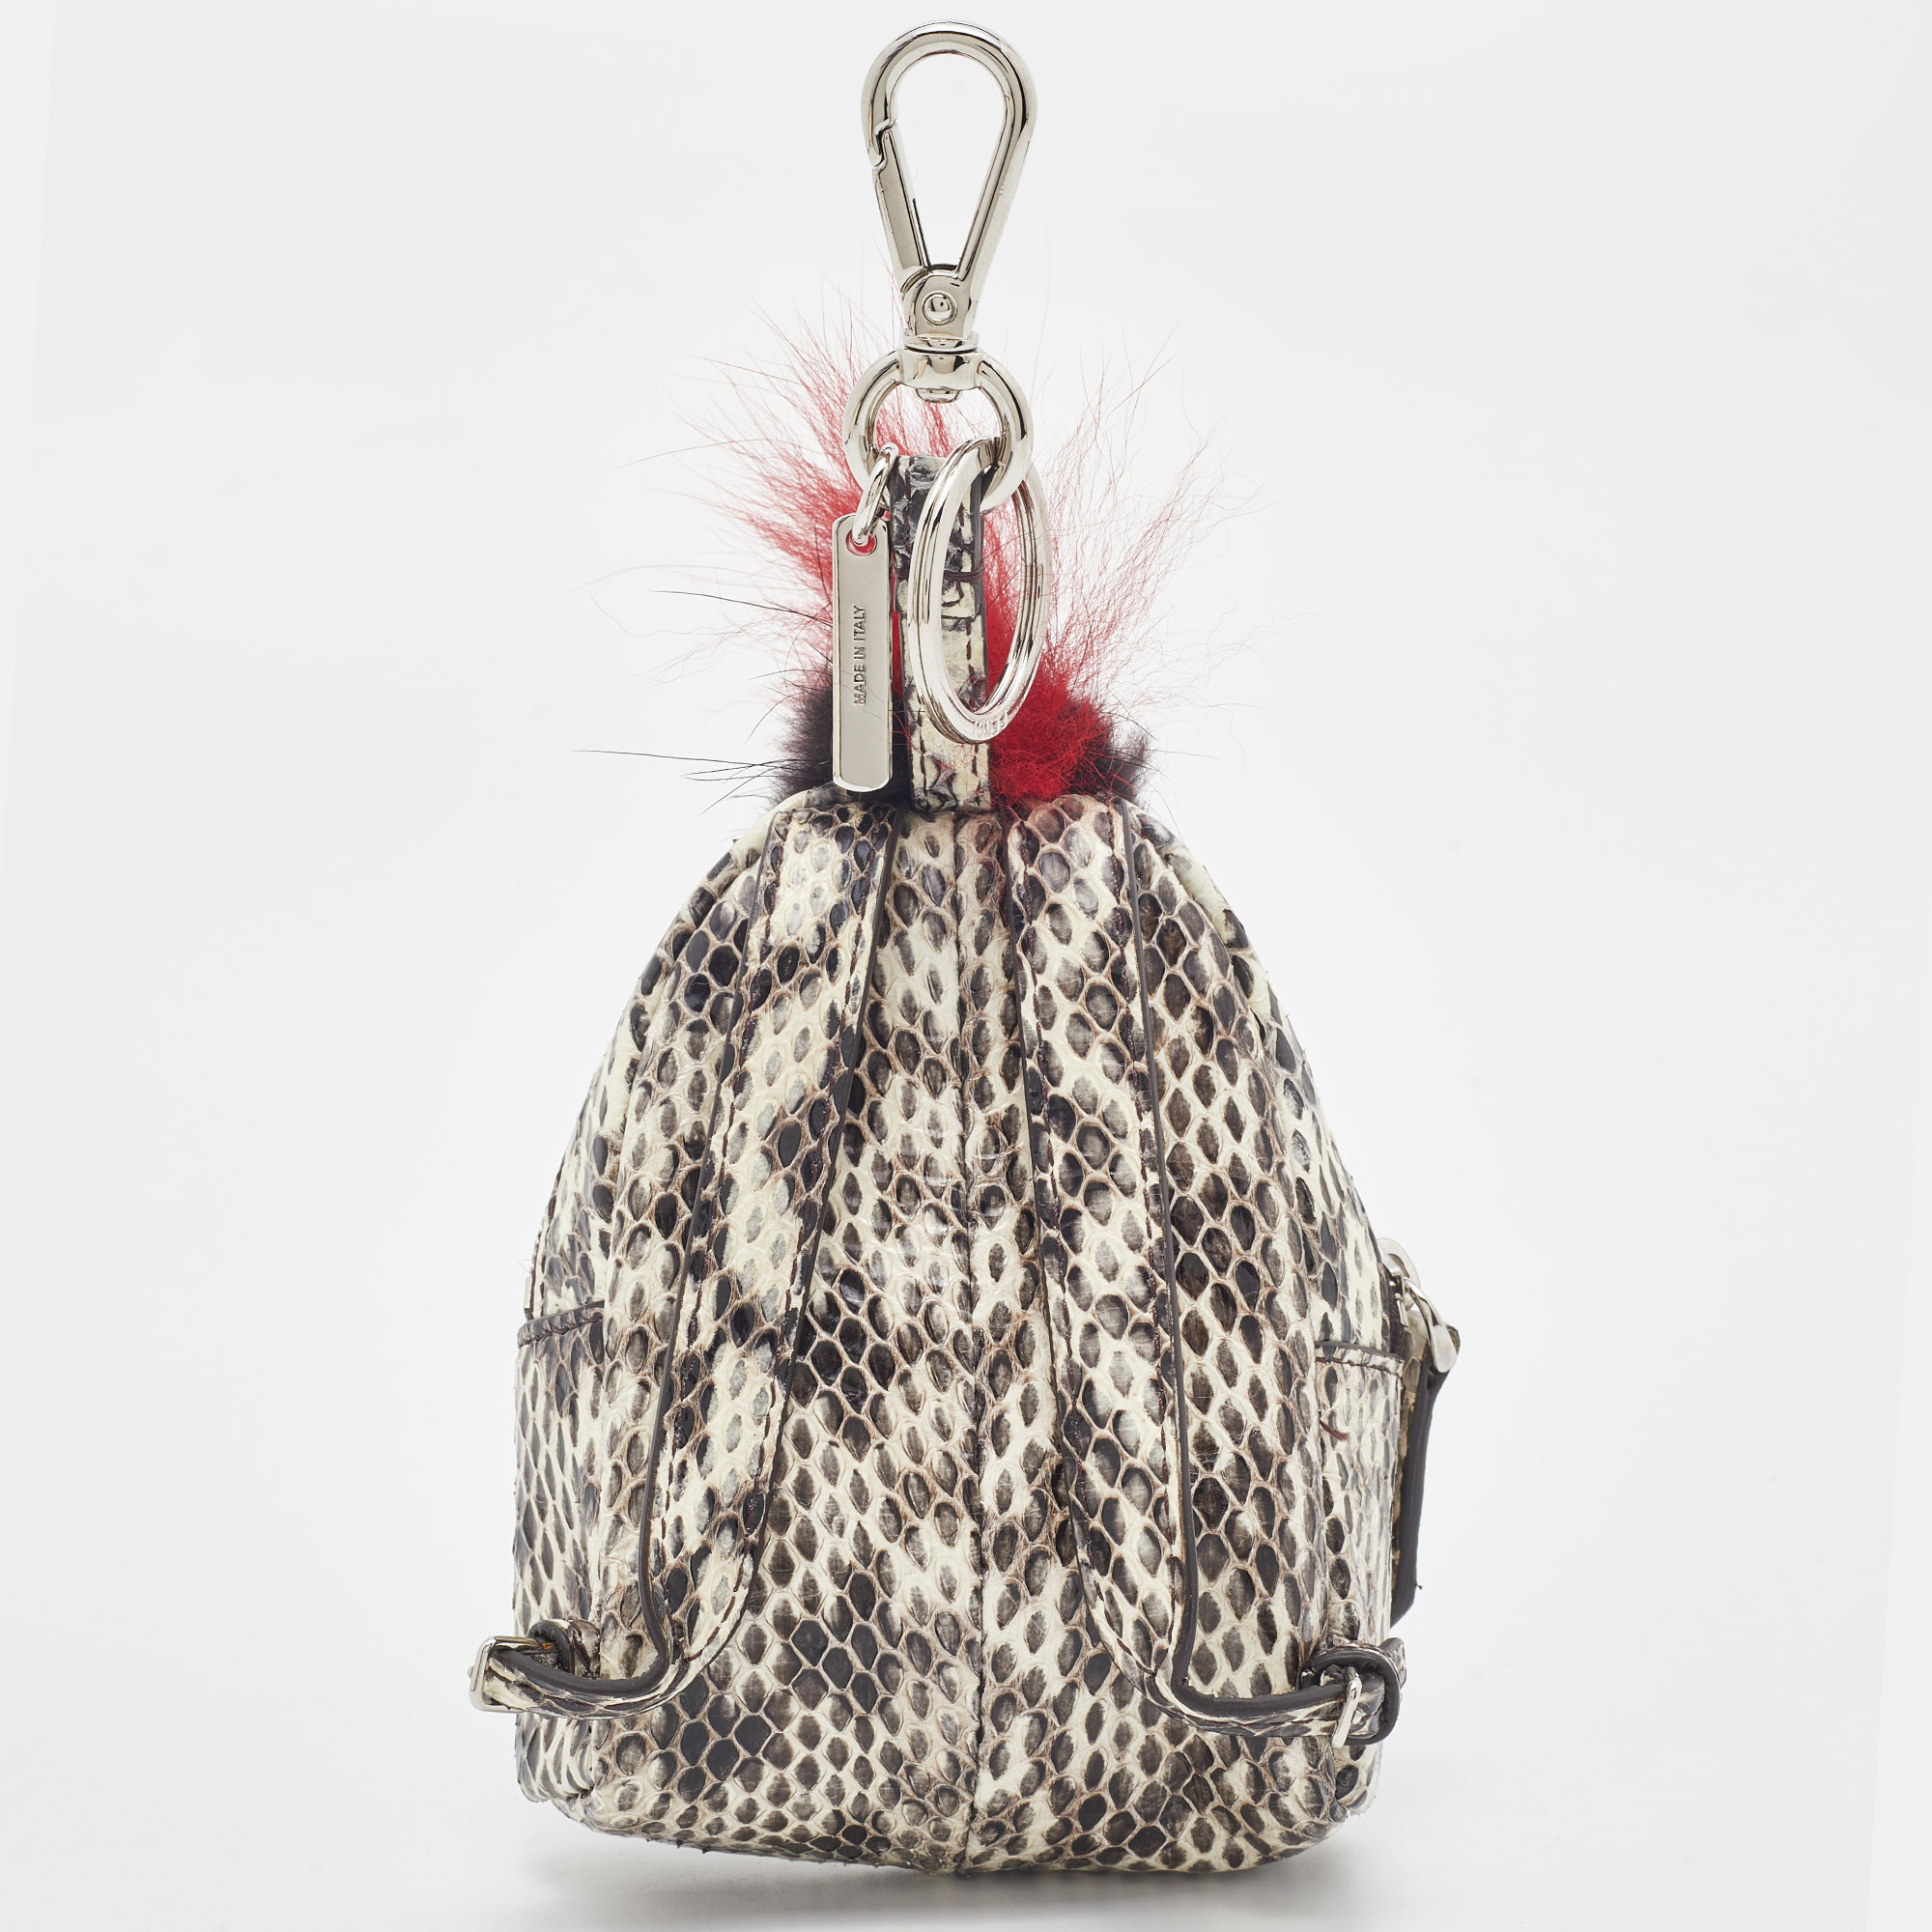 Fendi Multicolor Watersnake Leather And Fur Micro Monster Backpack Bag Charm